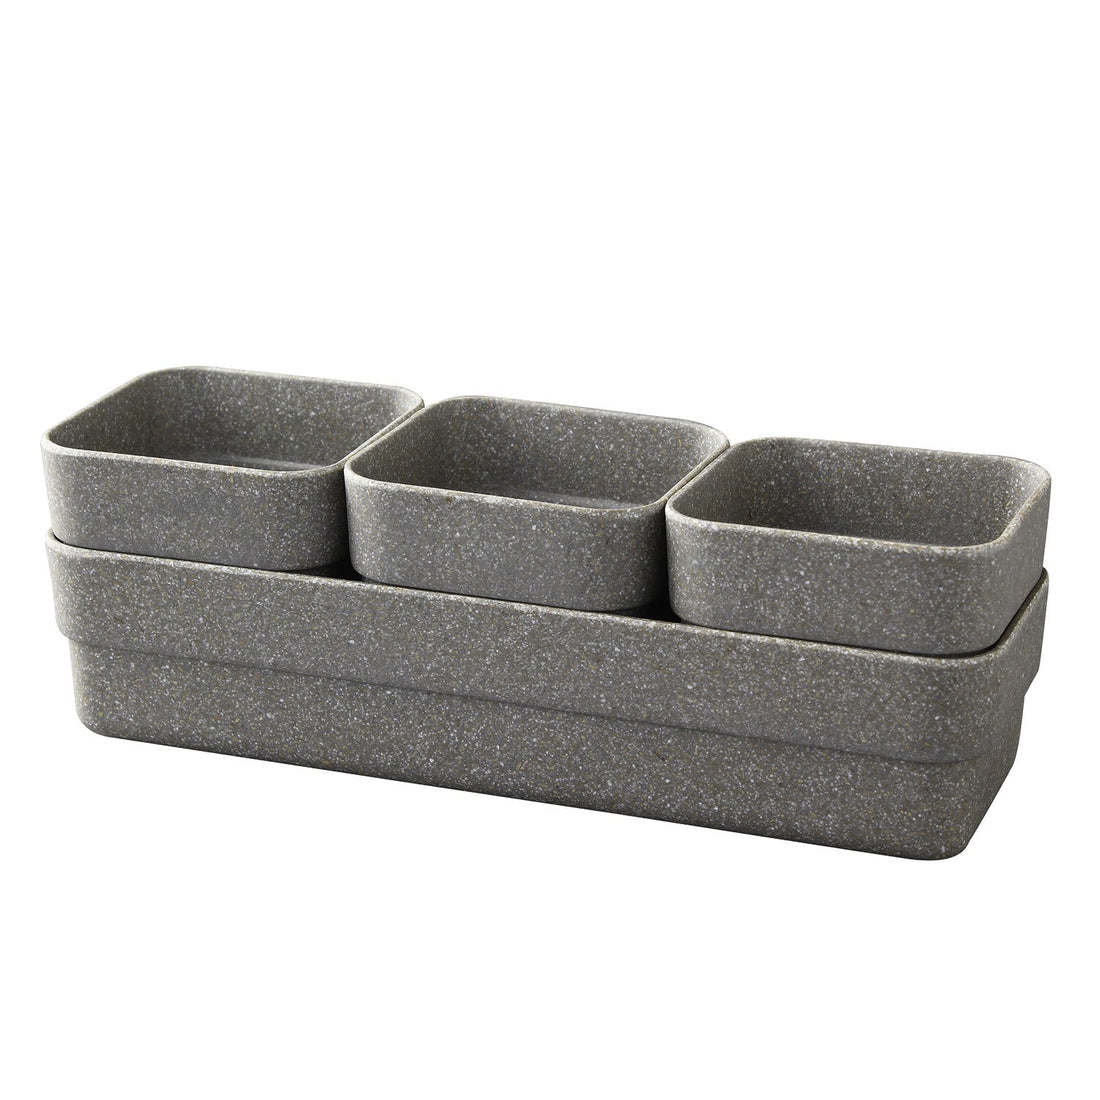 Eco Planter Herb - 3 Pots with Tray